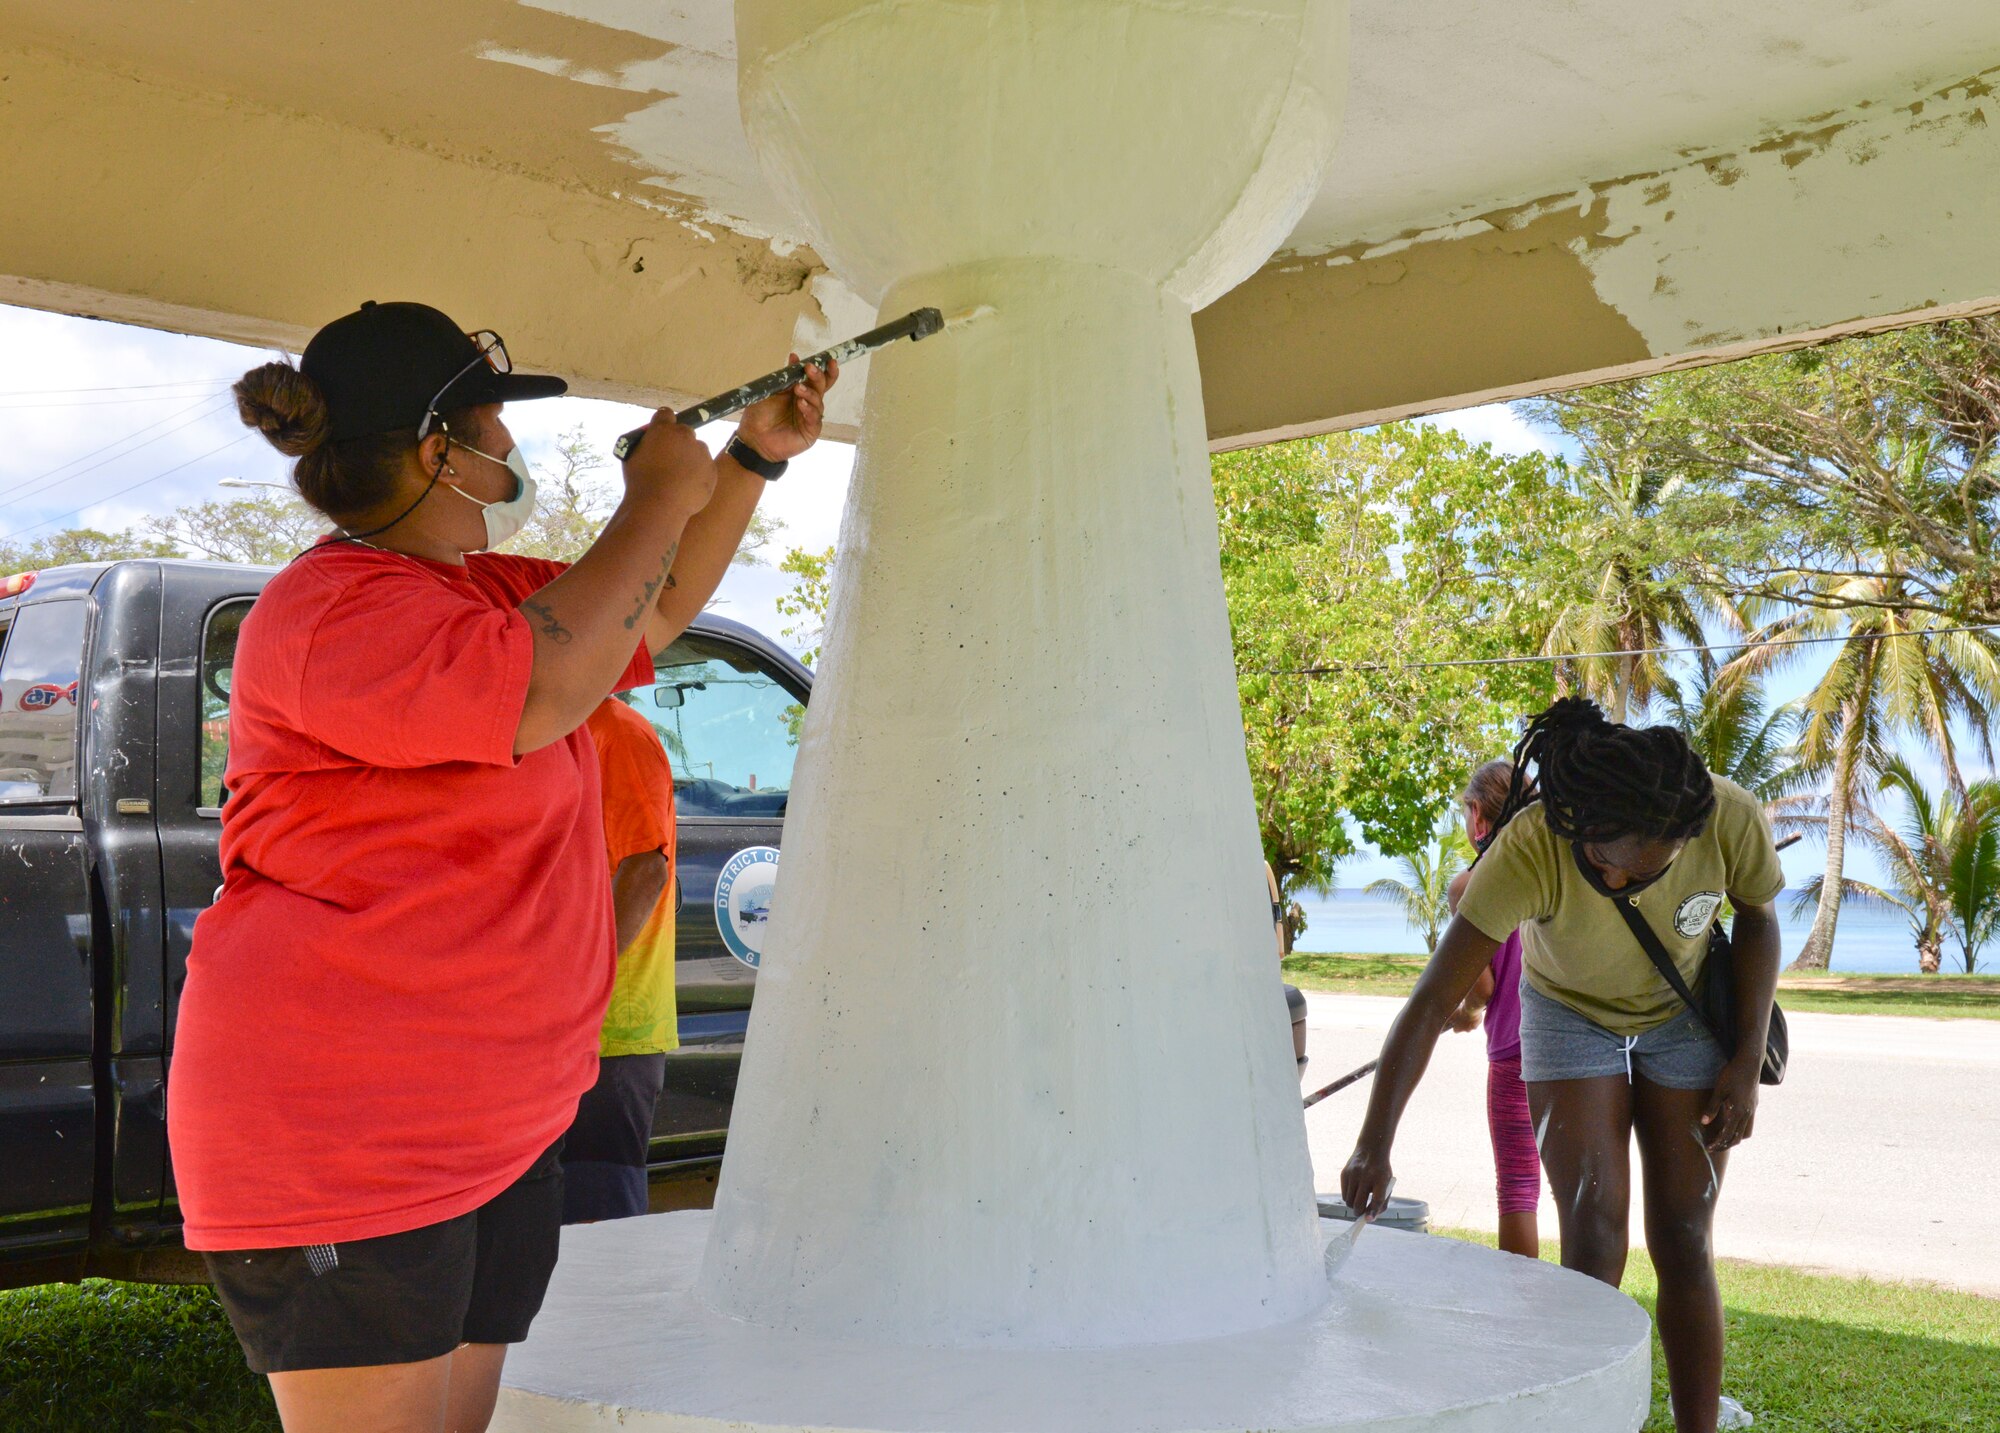 Chaunice Nauta, an Agat Mayor’s Office maintenance worker, and U.S. Air Force Senior Airman Alexis Northcutt, 36th Healthcare Operations Squadron medical logistics technician, paint a bus stop in Agat, Guam, March 20, 2021. Nearly a dozen 36th HCOS Airmen and family members joined Agat Mayor’s Office staff to repaint two village bus stops through the Andersen Air Force Base Sister Village Sister Squadron program, in which squadron volunteers collaborate in events with Guam residents to strengthen their friendship and partnership. (U.S. Air Force photo by Alana Chargualaf)